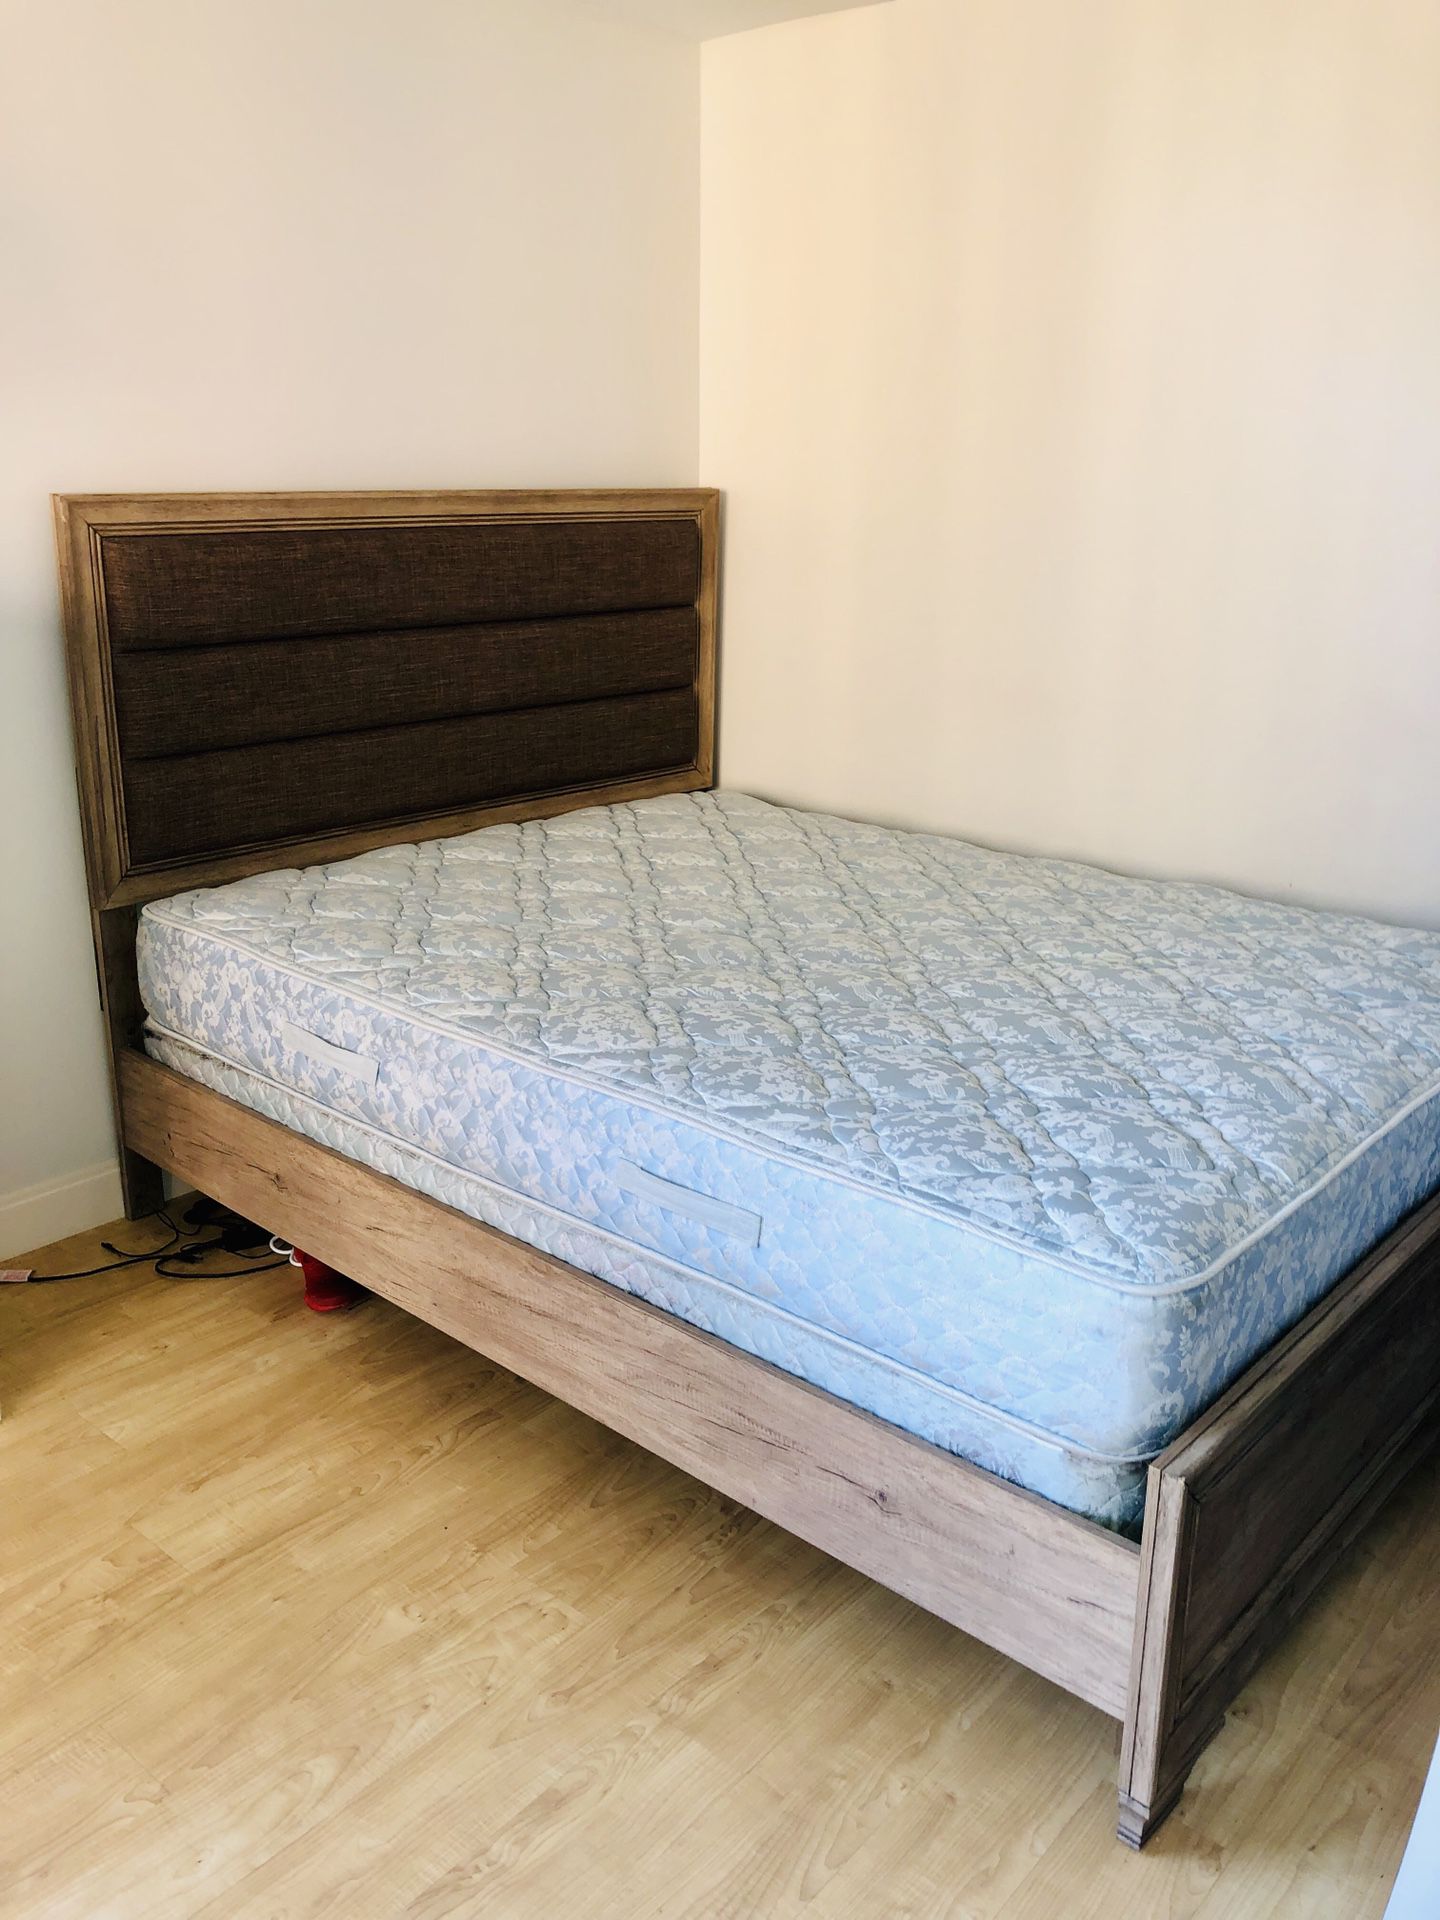 Queen sized bed frame and mattress for sale.